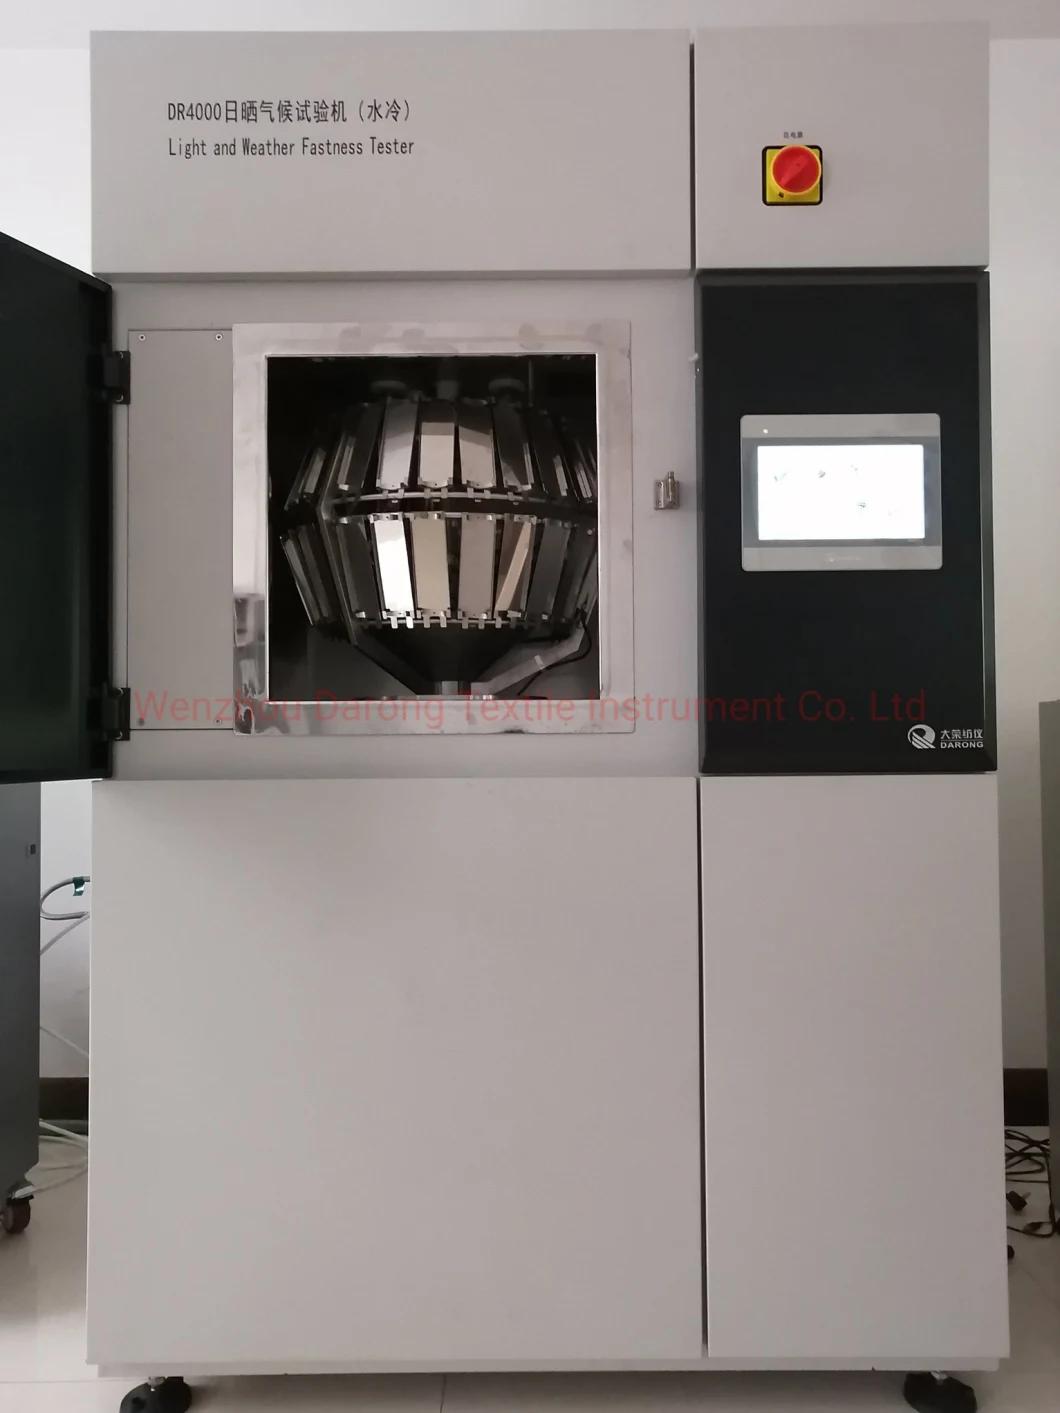 Xenon Arc Light Color Fastness Aging Lab Laboratory Test Instrument